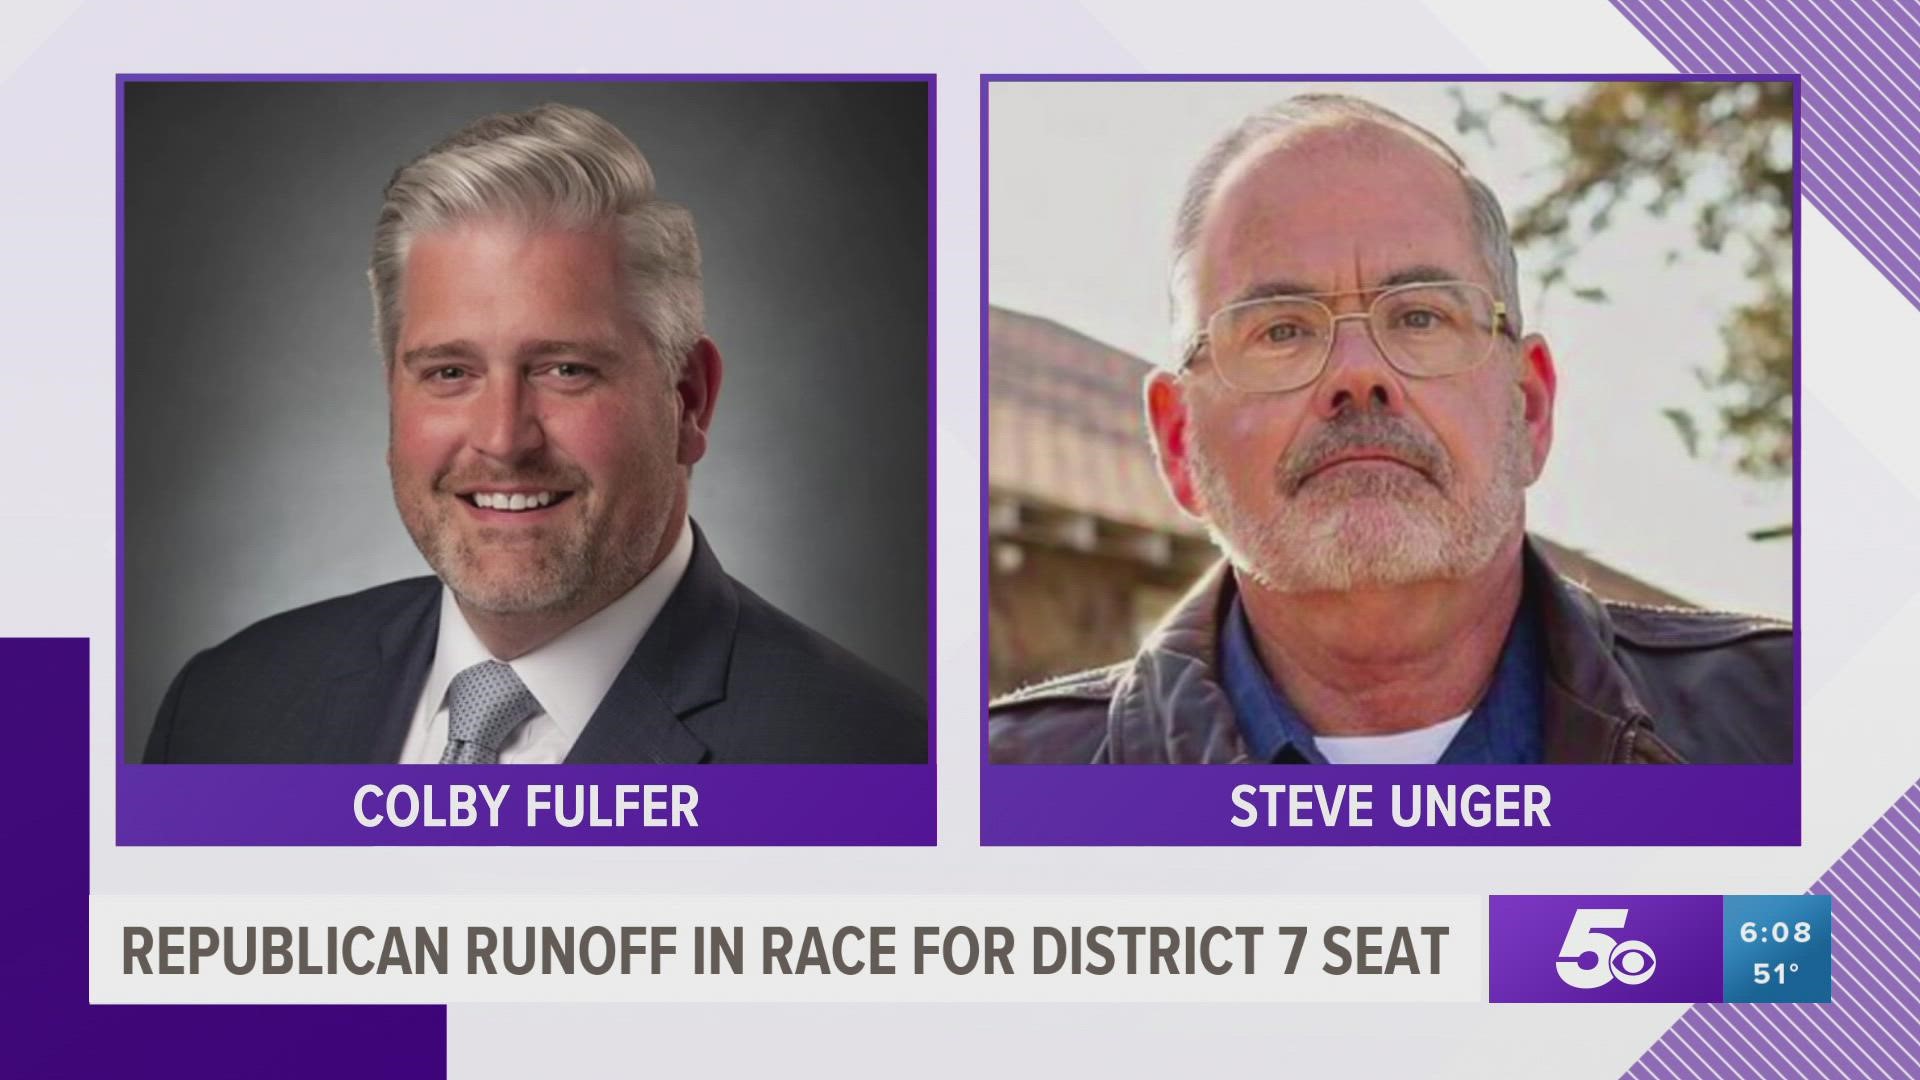 Voters in eastern Washington County will decide the Republican candidate for the State Senate District 7 seat Tuesday.